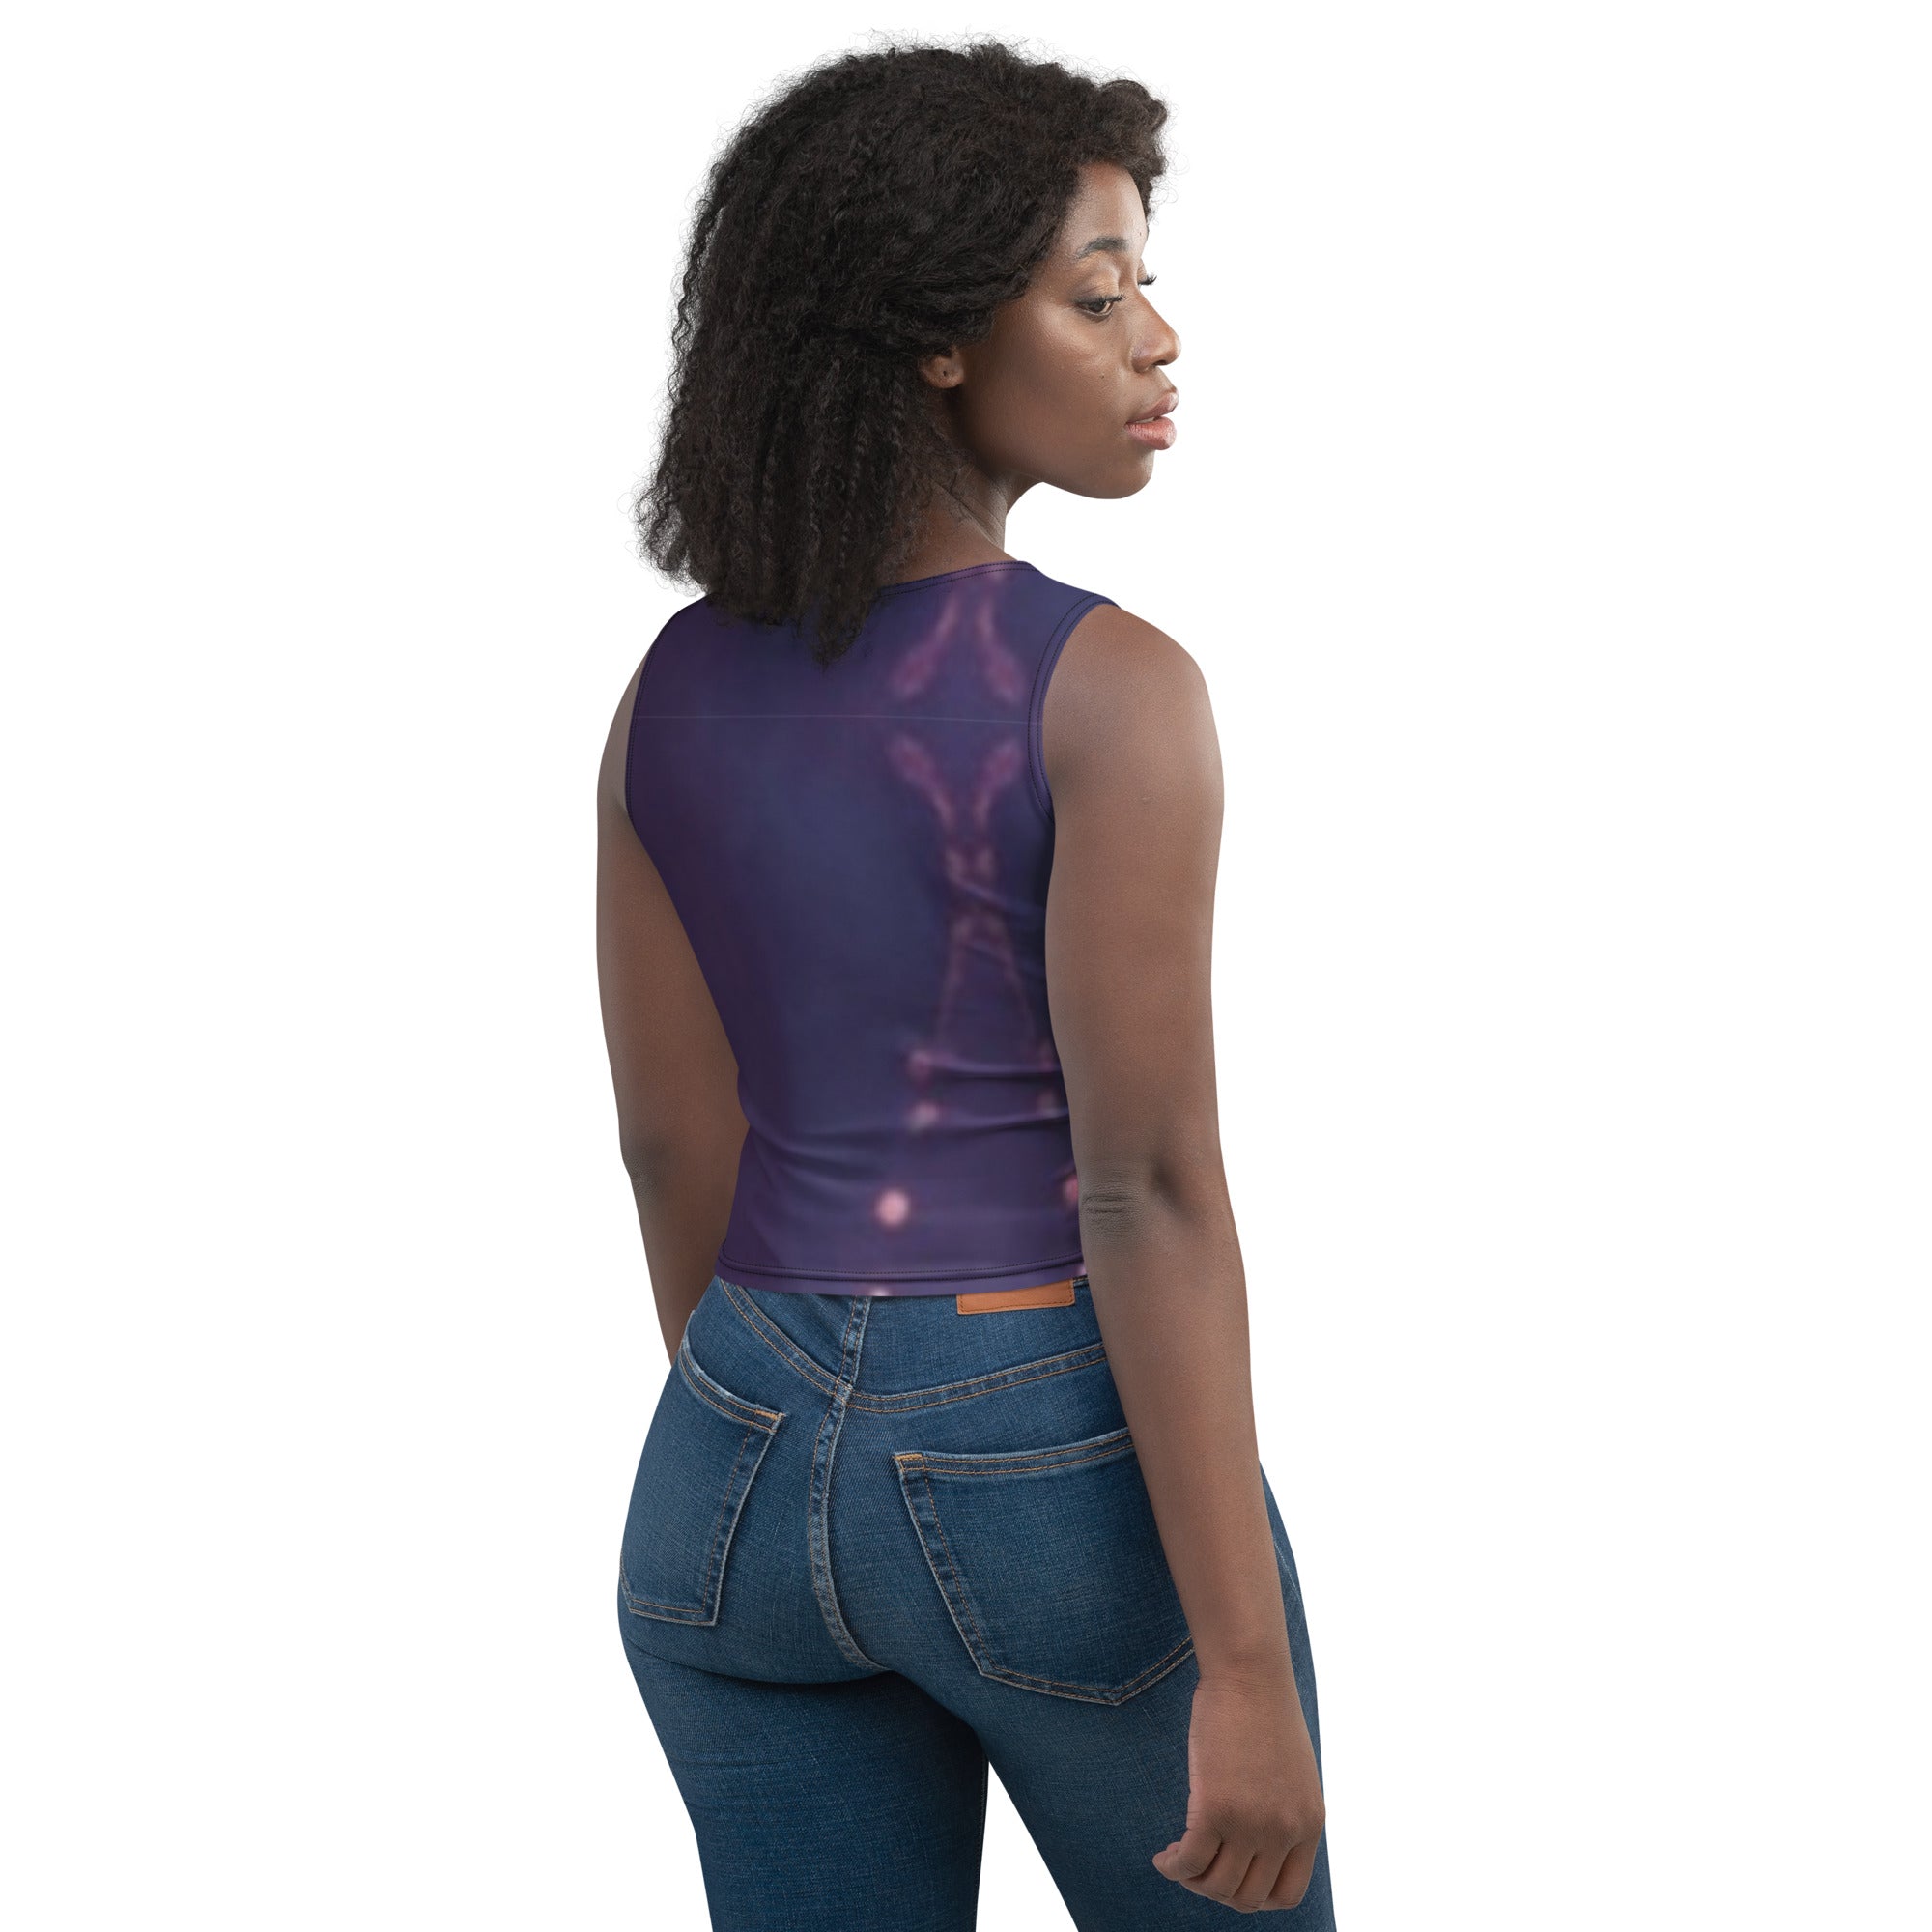 Mesmerizing Purple Crop Top for Woman and Girls